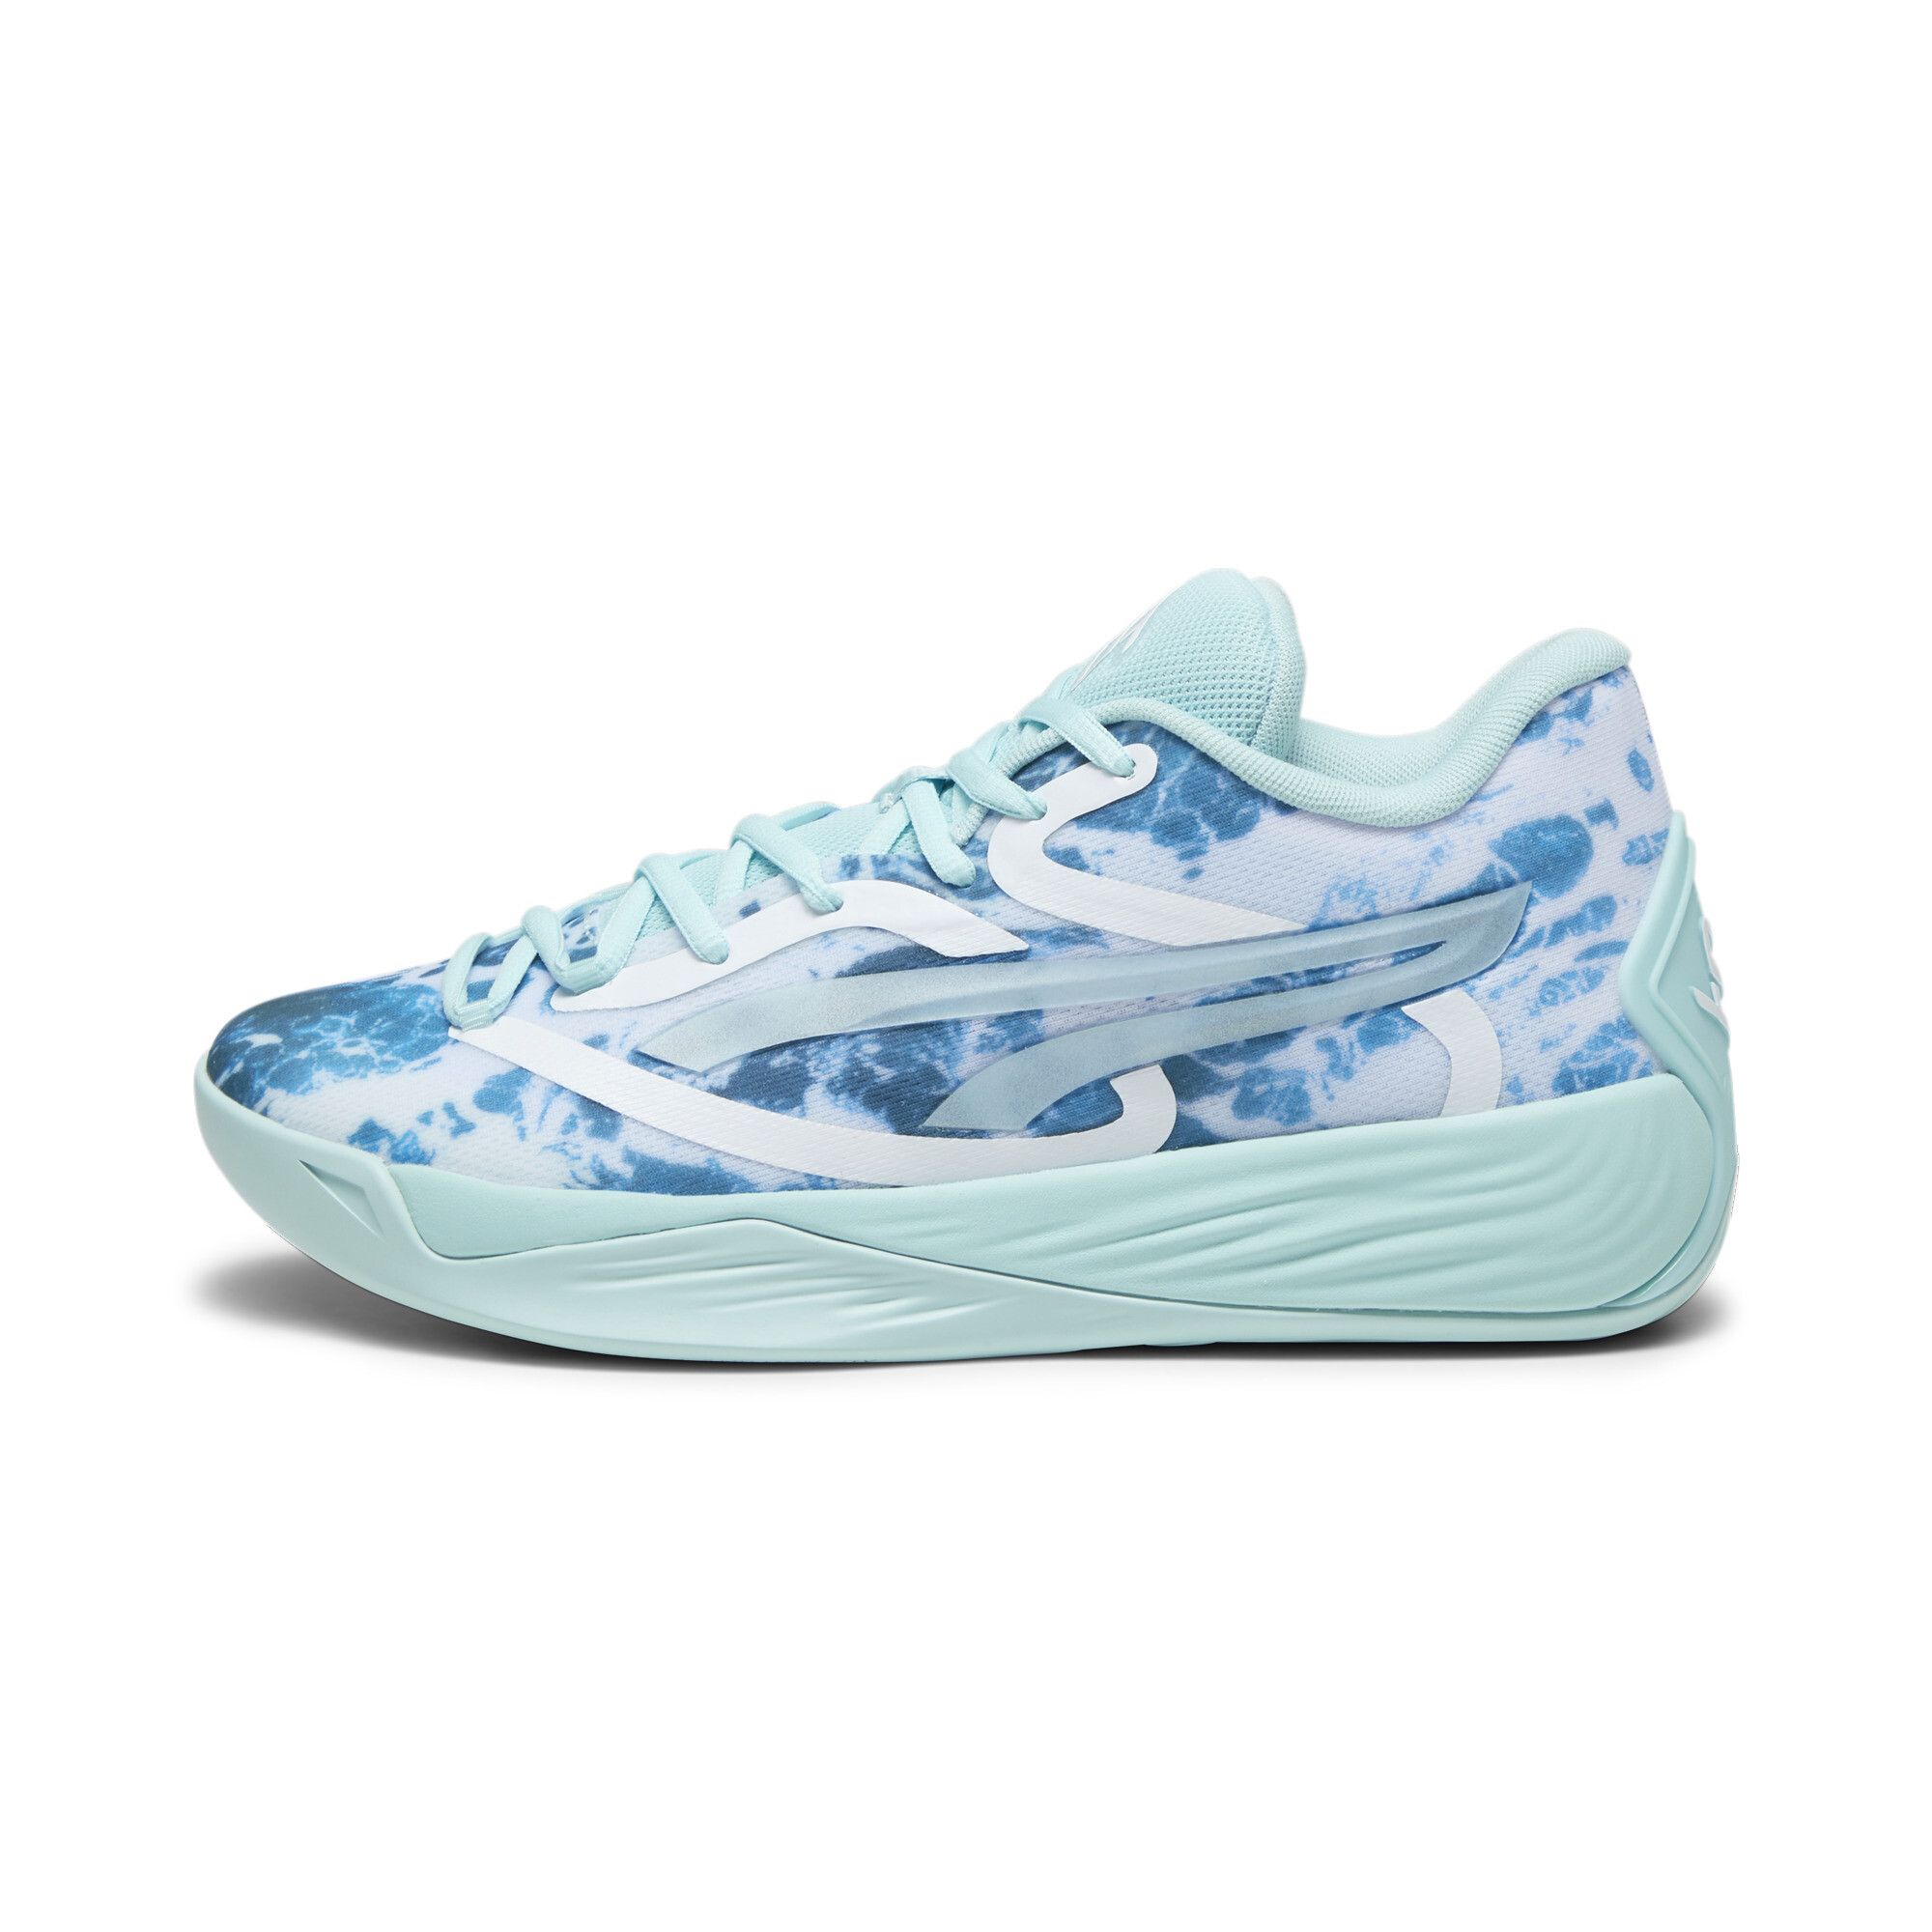 Women's Puma Stewie 2 Water's Basketball Shoes, Blue, Size 46, Shoes